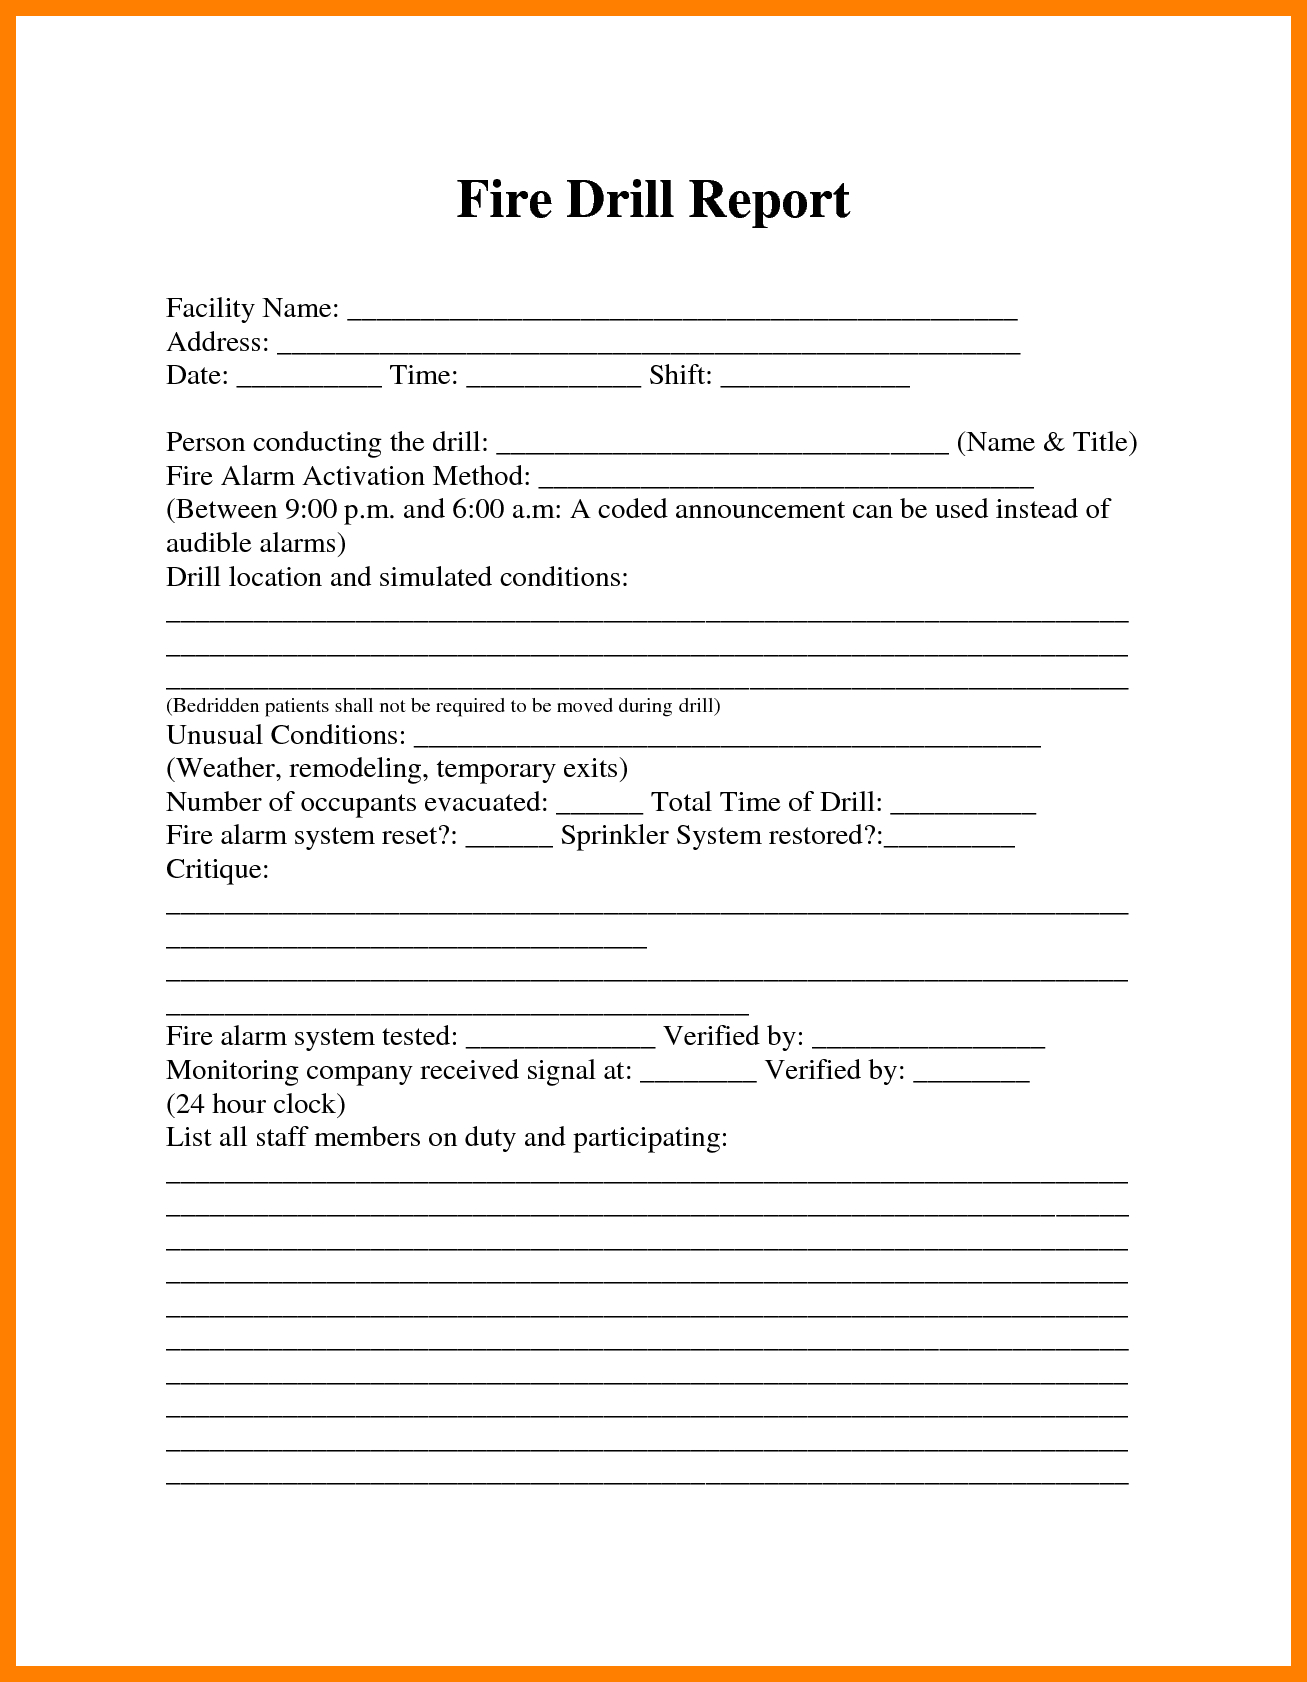 Fire Drill Report Template Uk 12 Things That Happen When Regarding Emergency Drill Report Template